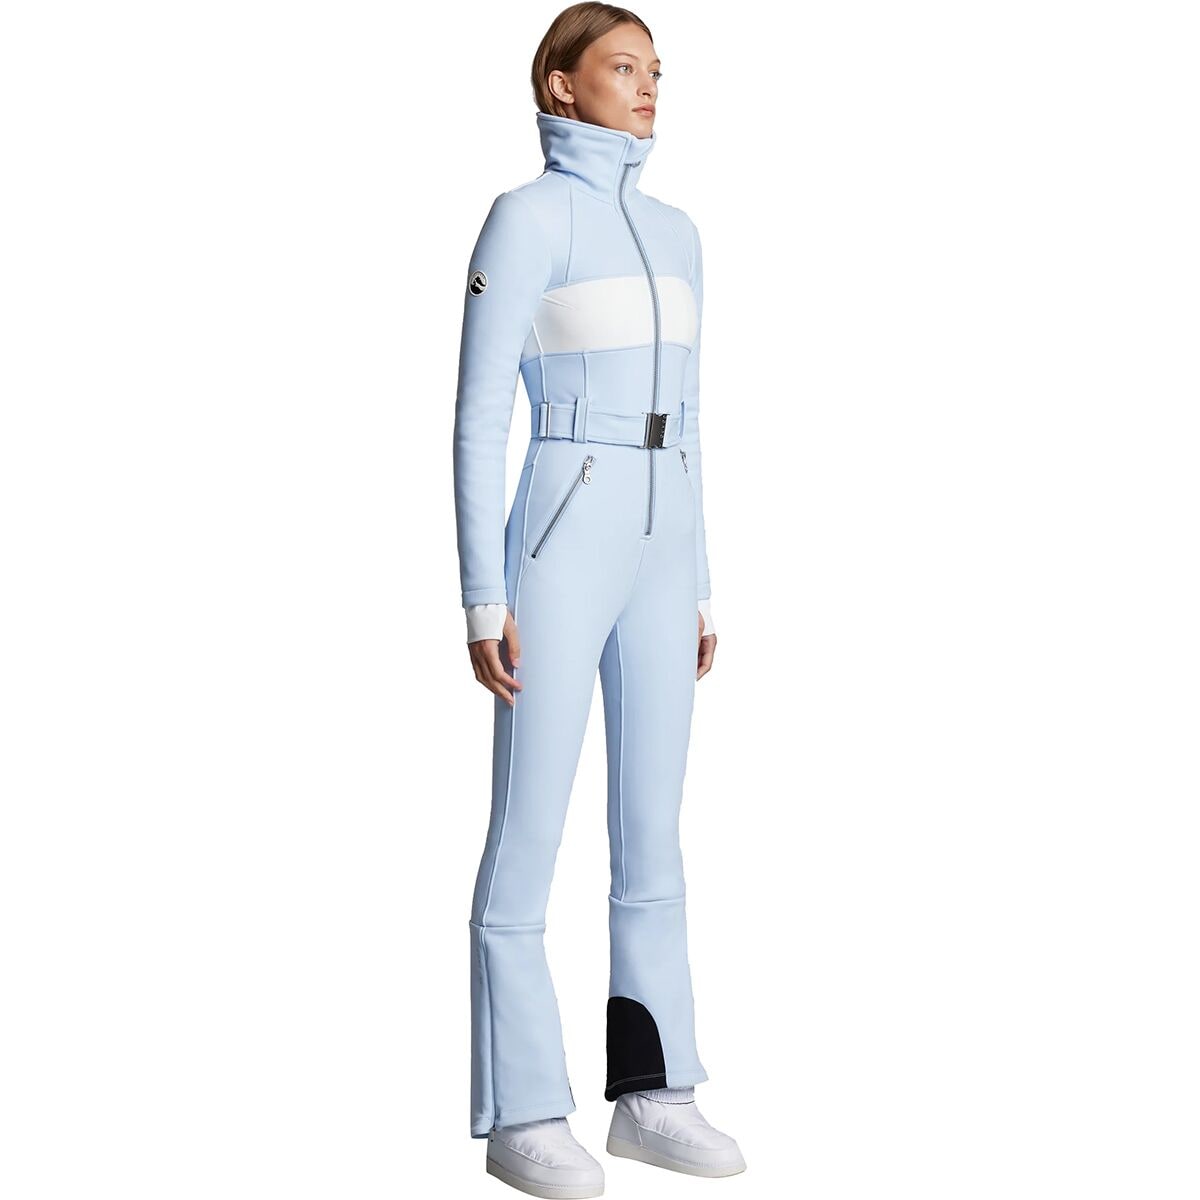 Cordova Fora Snow Suit - Women's - Clothing | Backcountry